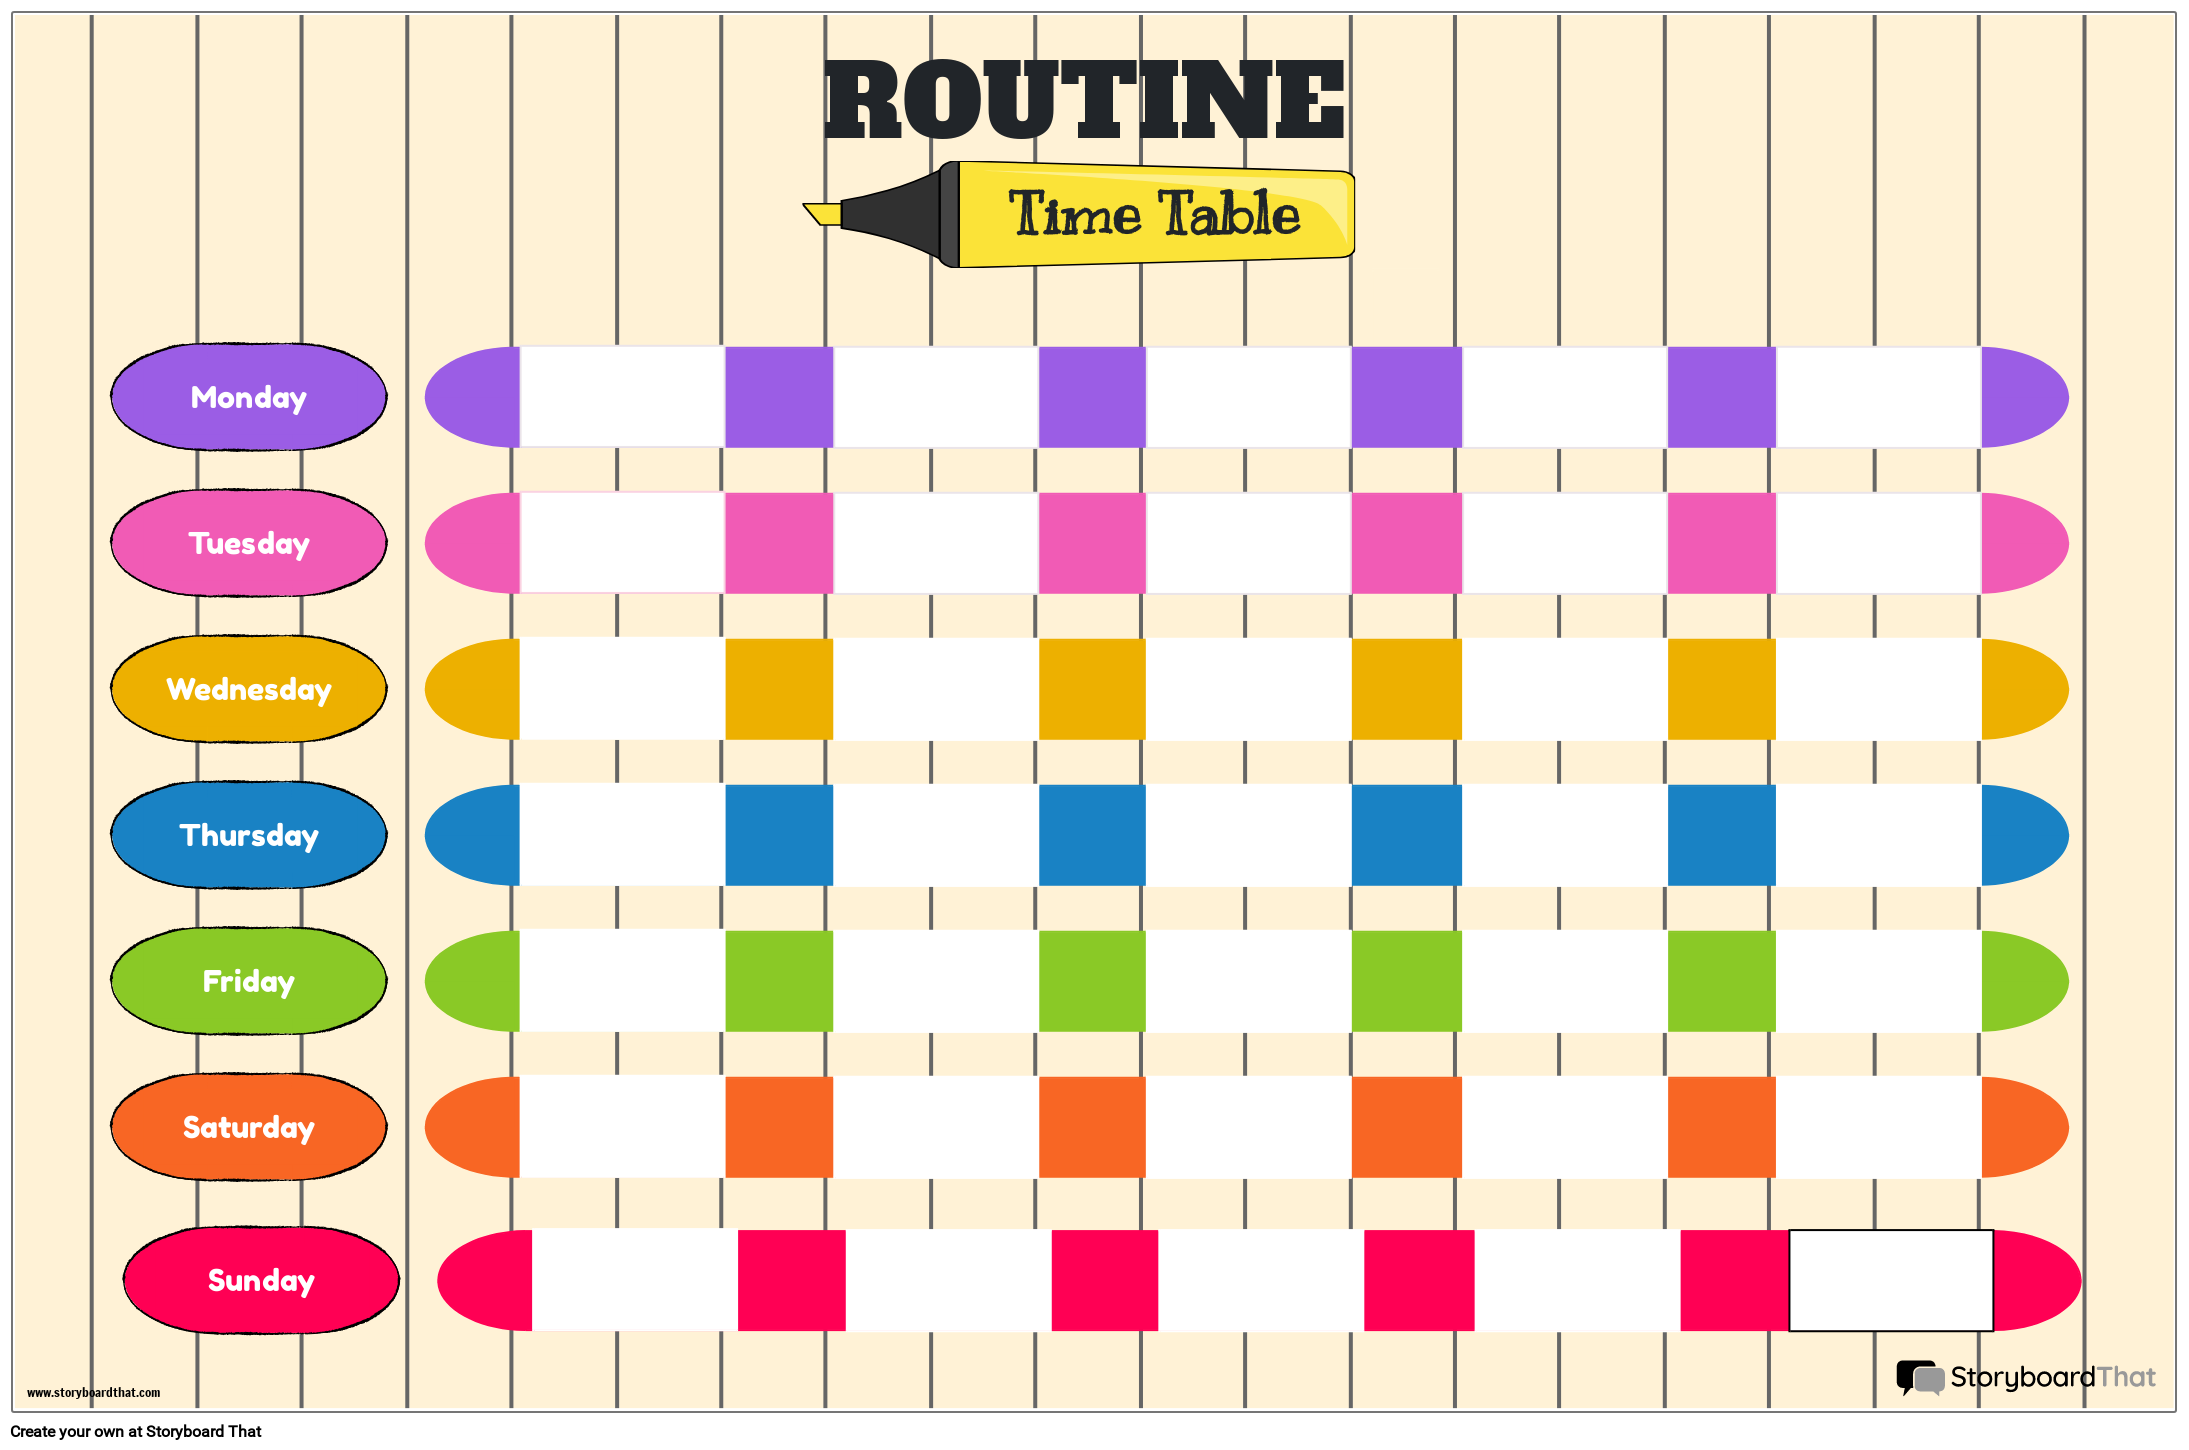 Routine Time Table